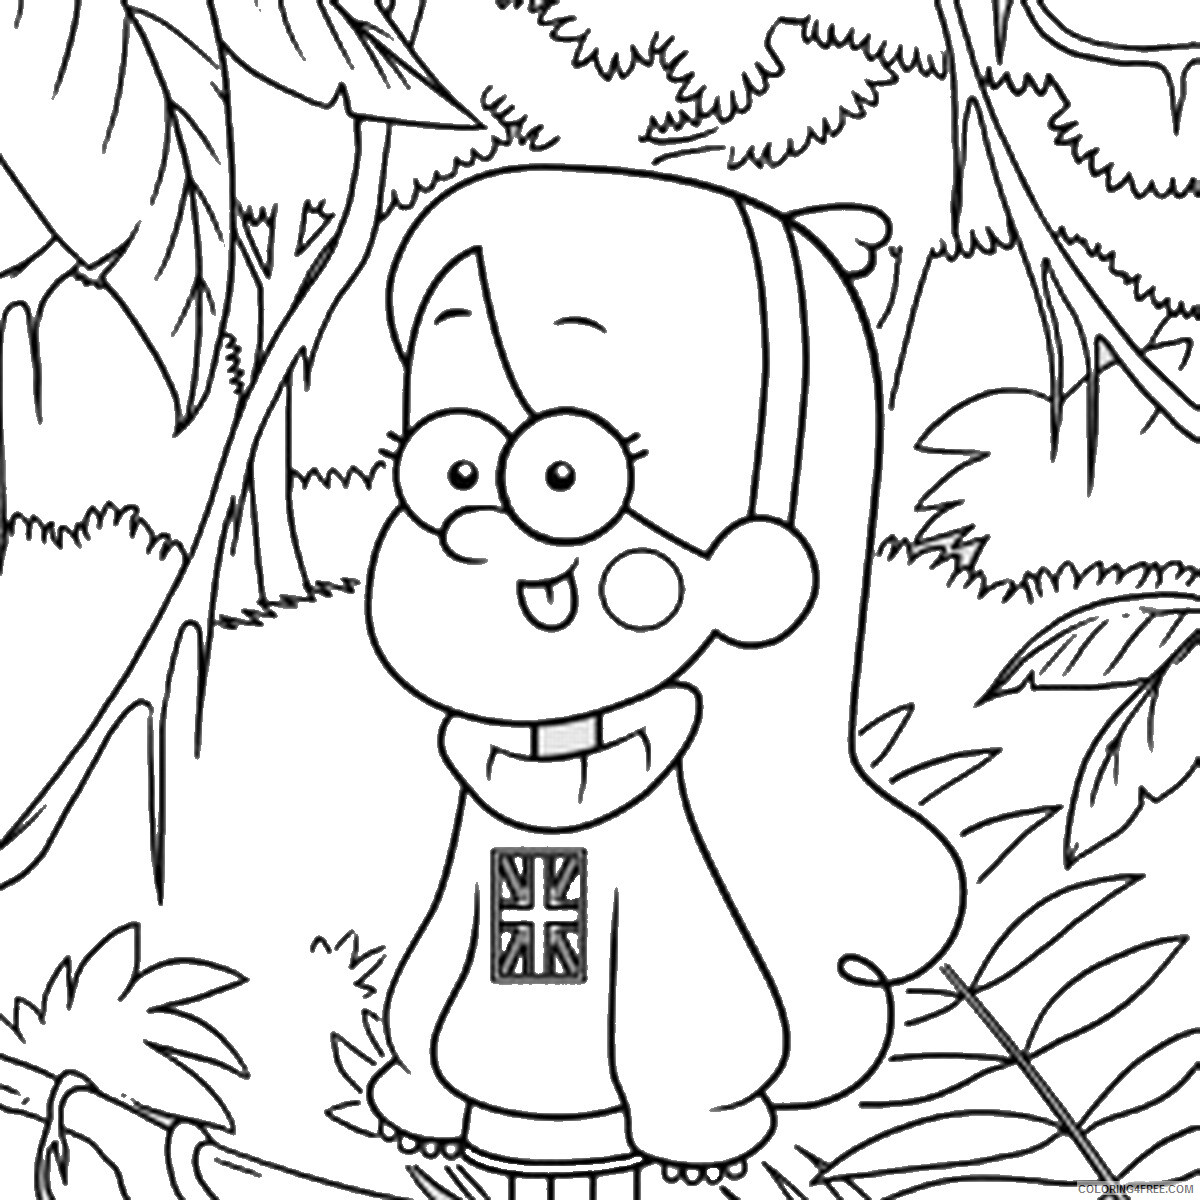 Gravity Falls Coloring Pages TV Film coloring_18 Printable 2020 03335 Coloring4free